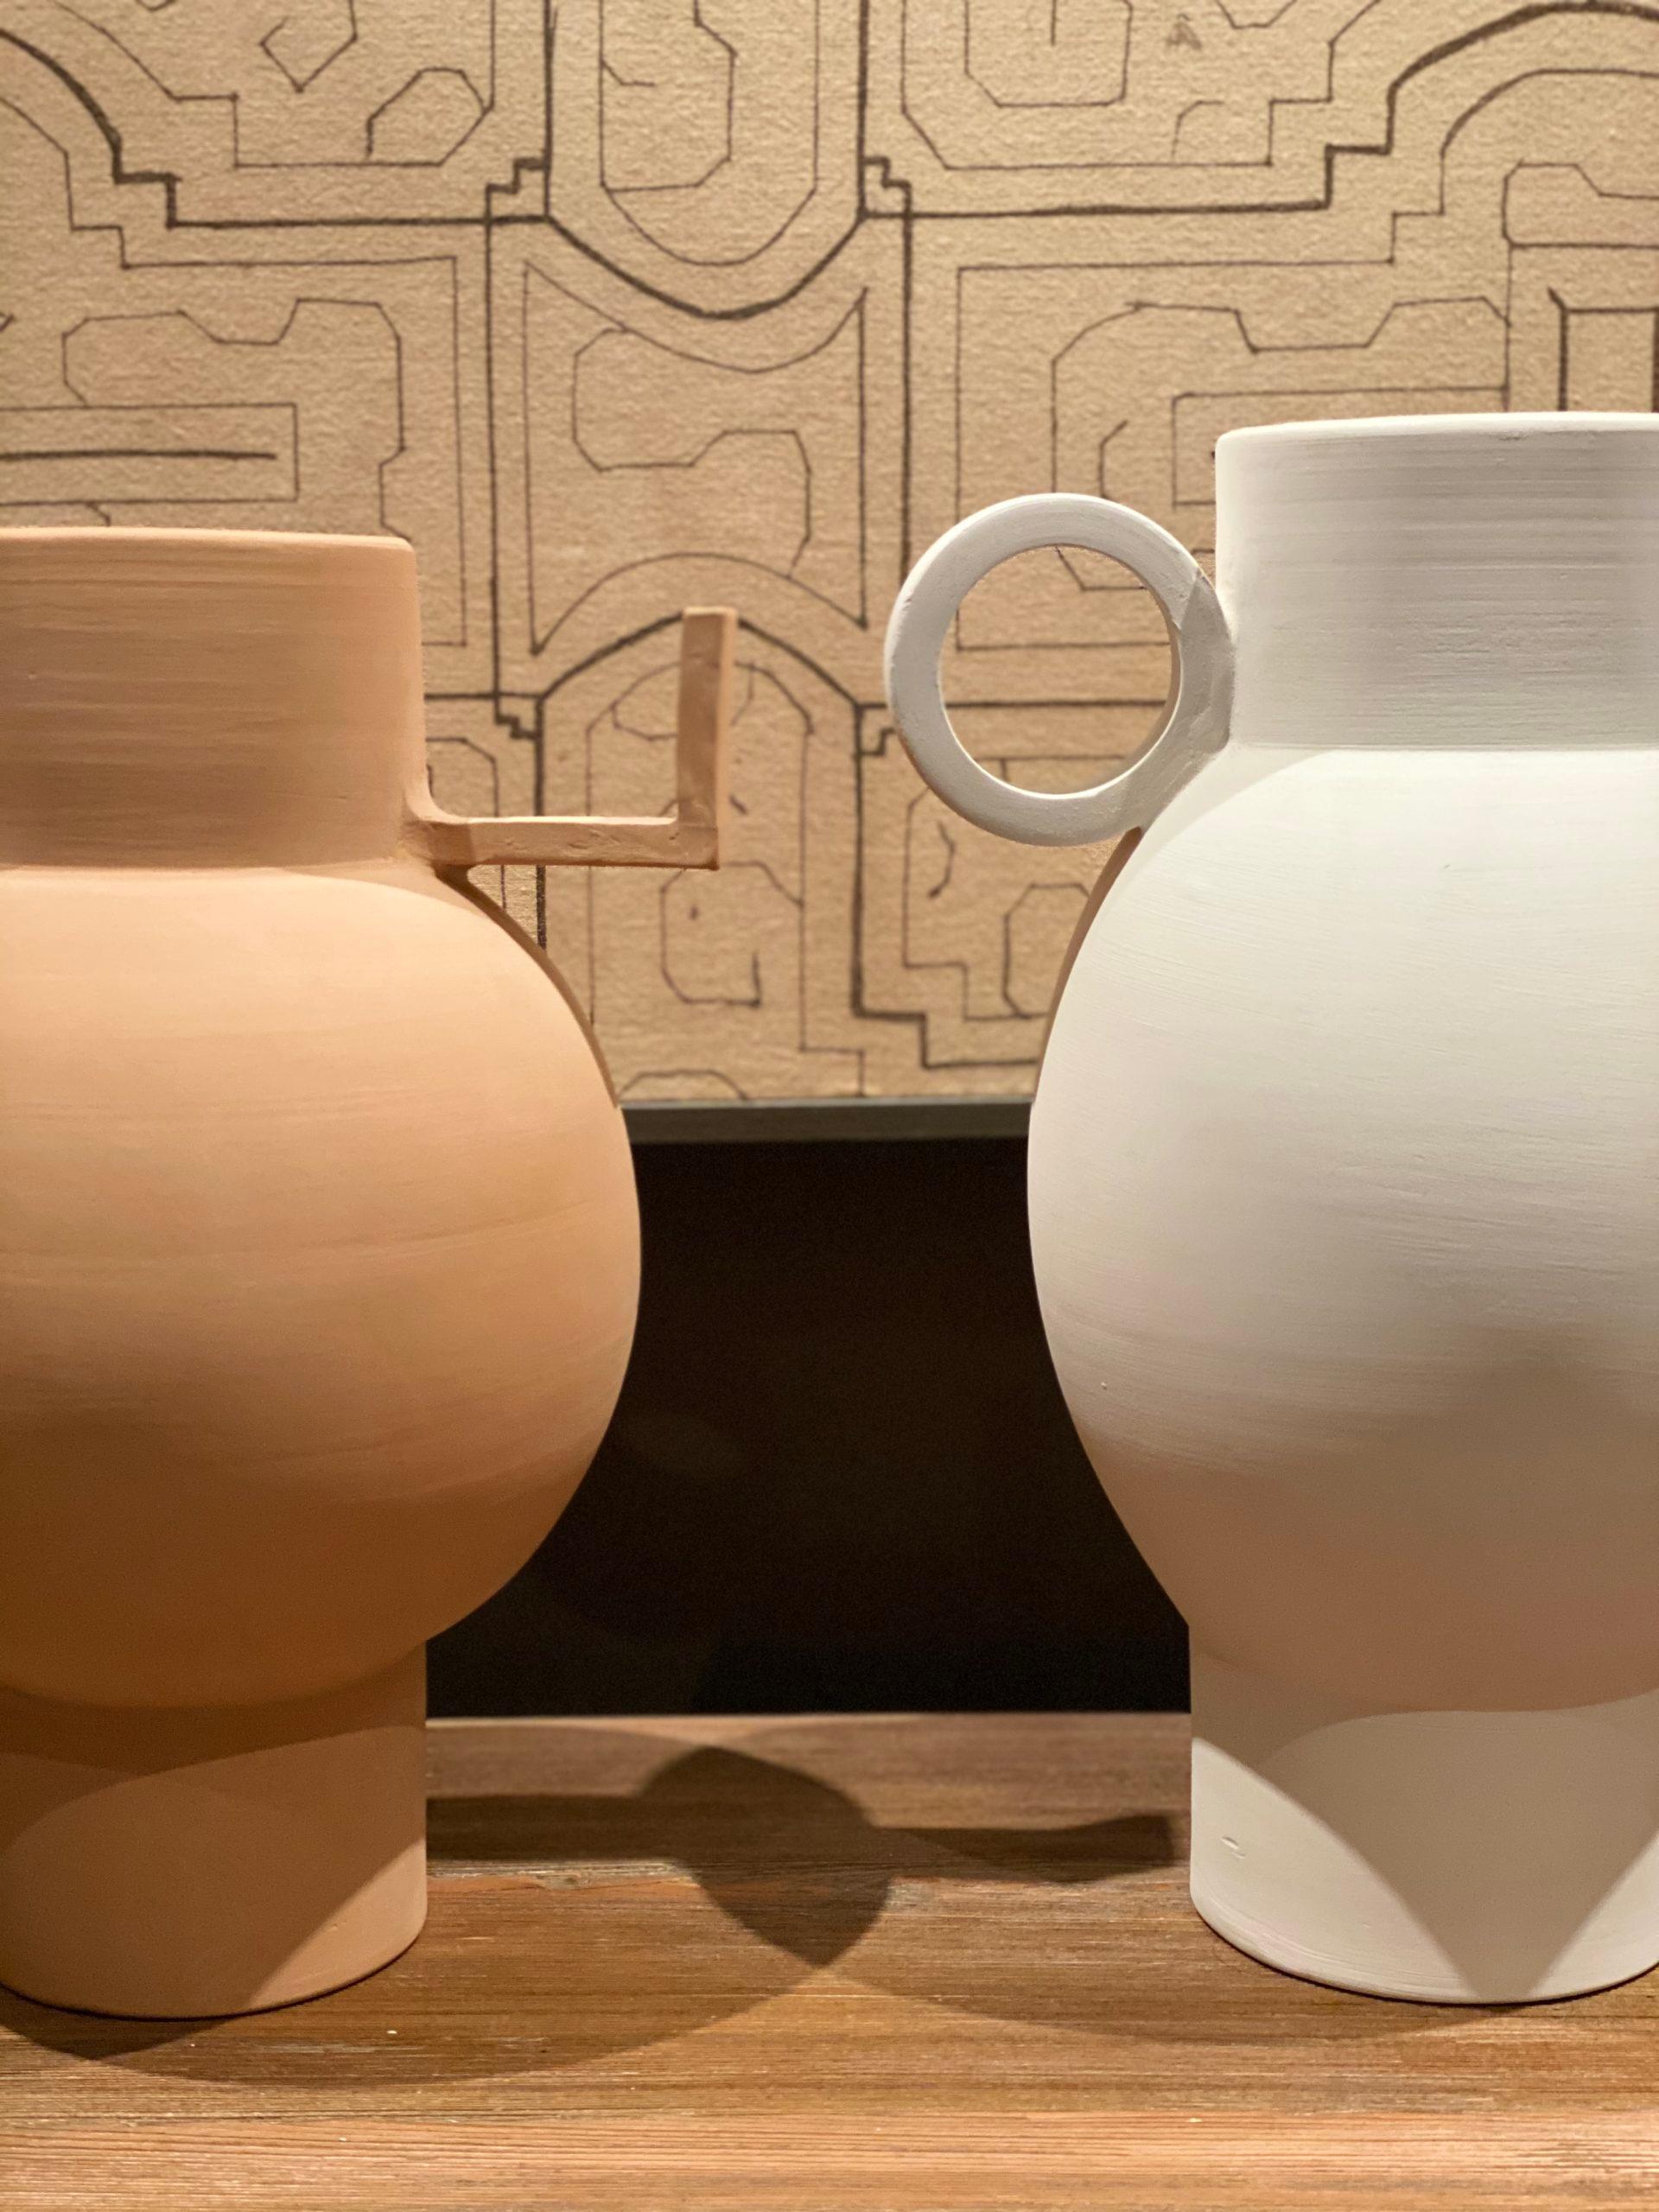 Hand-Crafted Ornithos Terracotta Vase by Lea Ginac